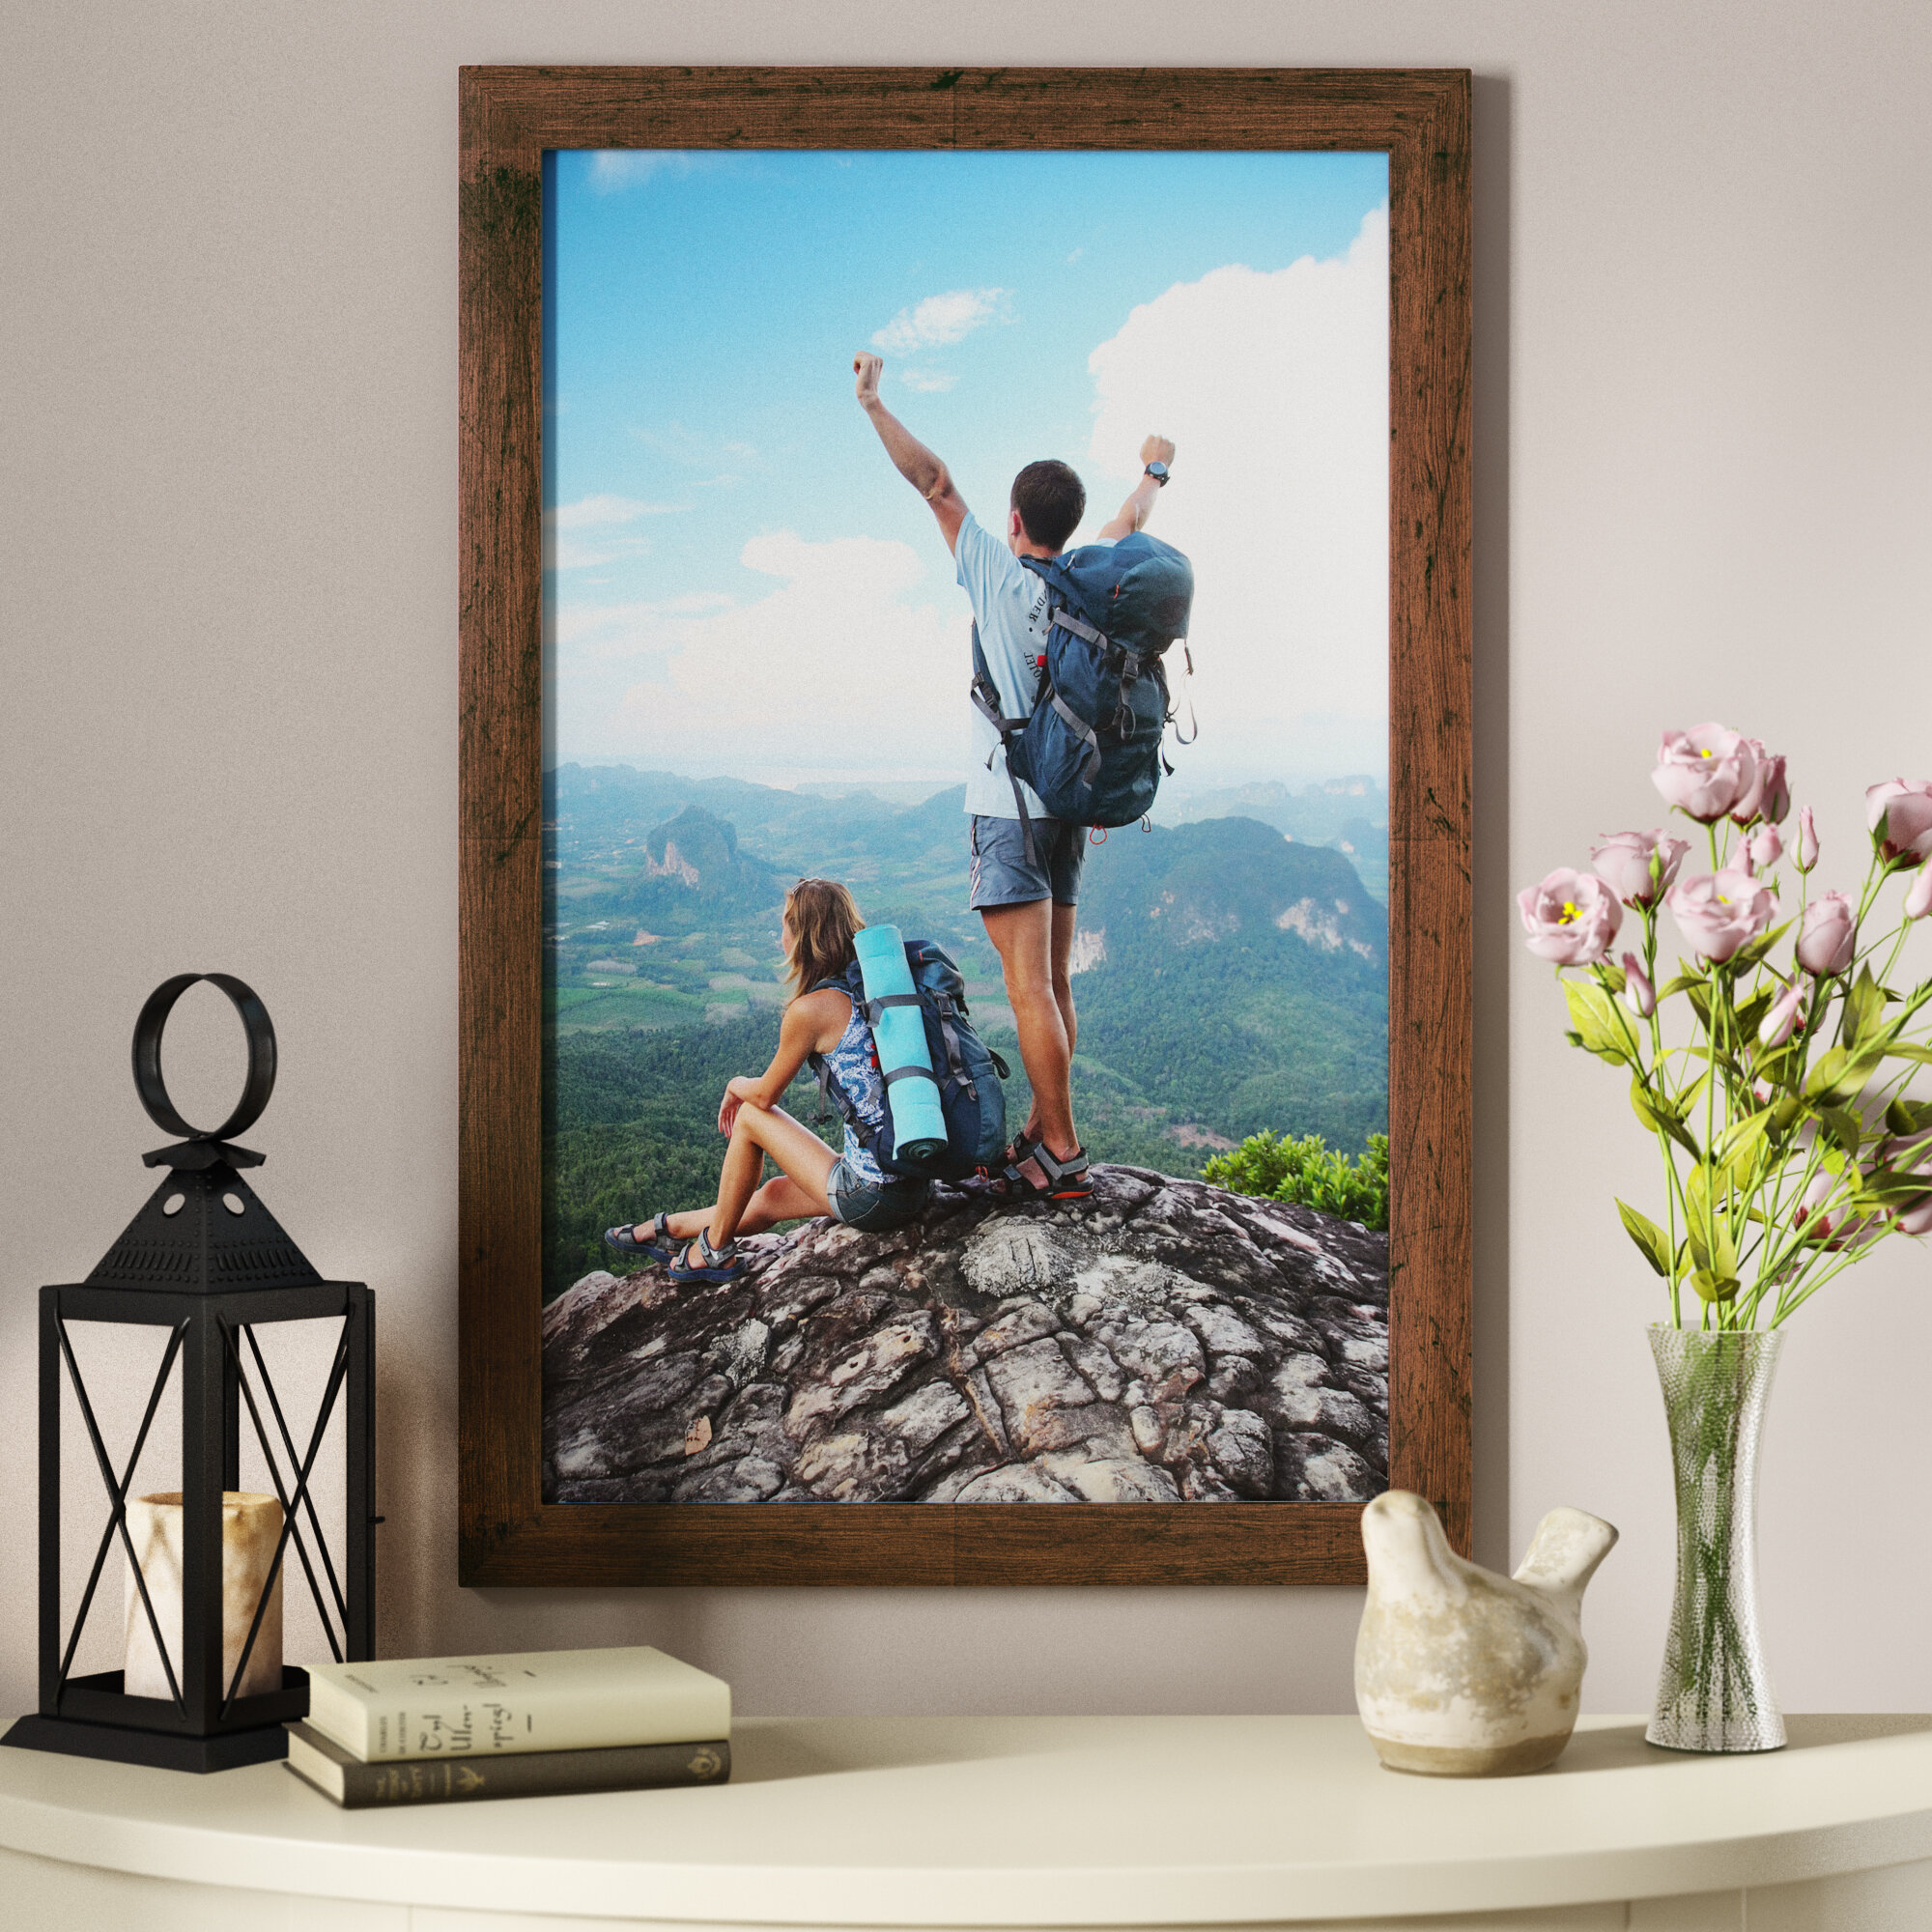 Collage Picture Frames Hanging Photo Display Rustic Wood Weathered Walnut 